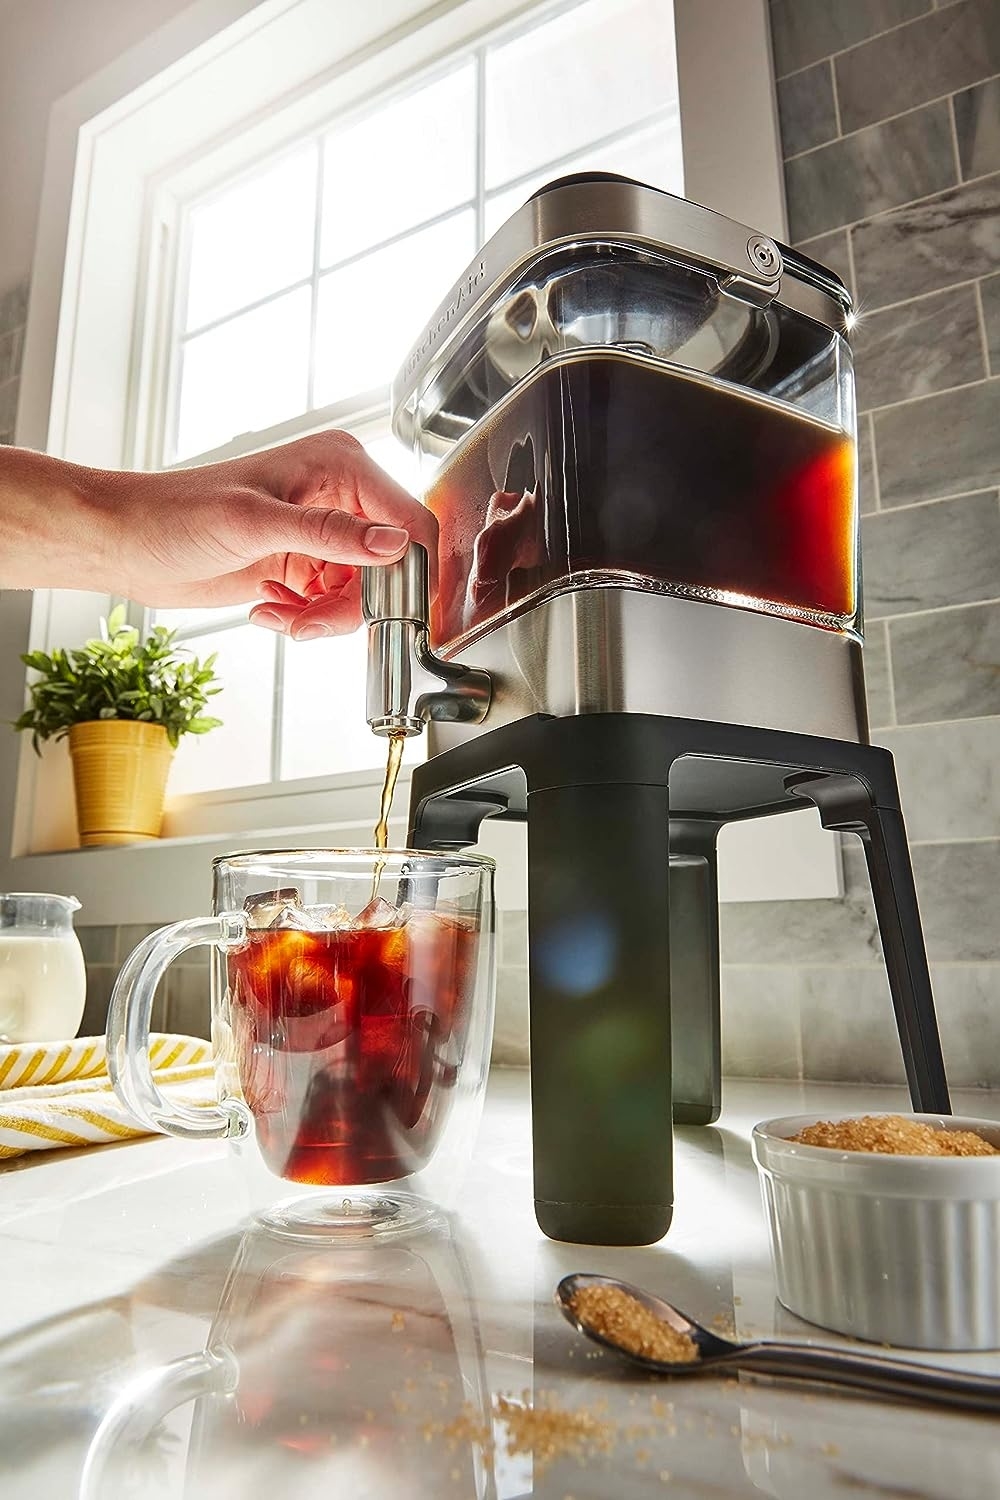 the cold brew maker with a hand using it to dispense coffee